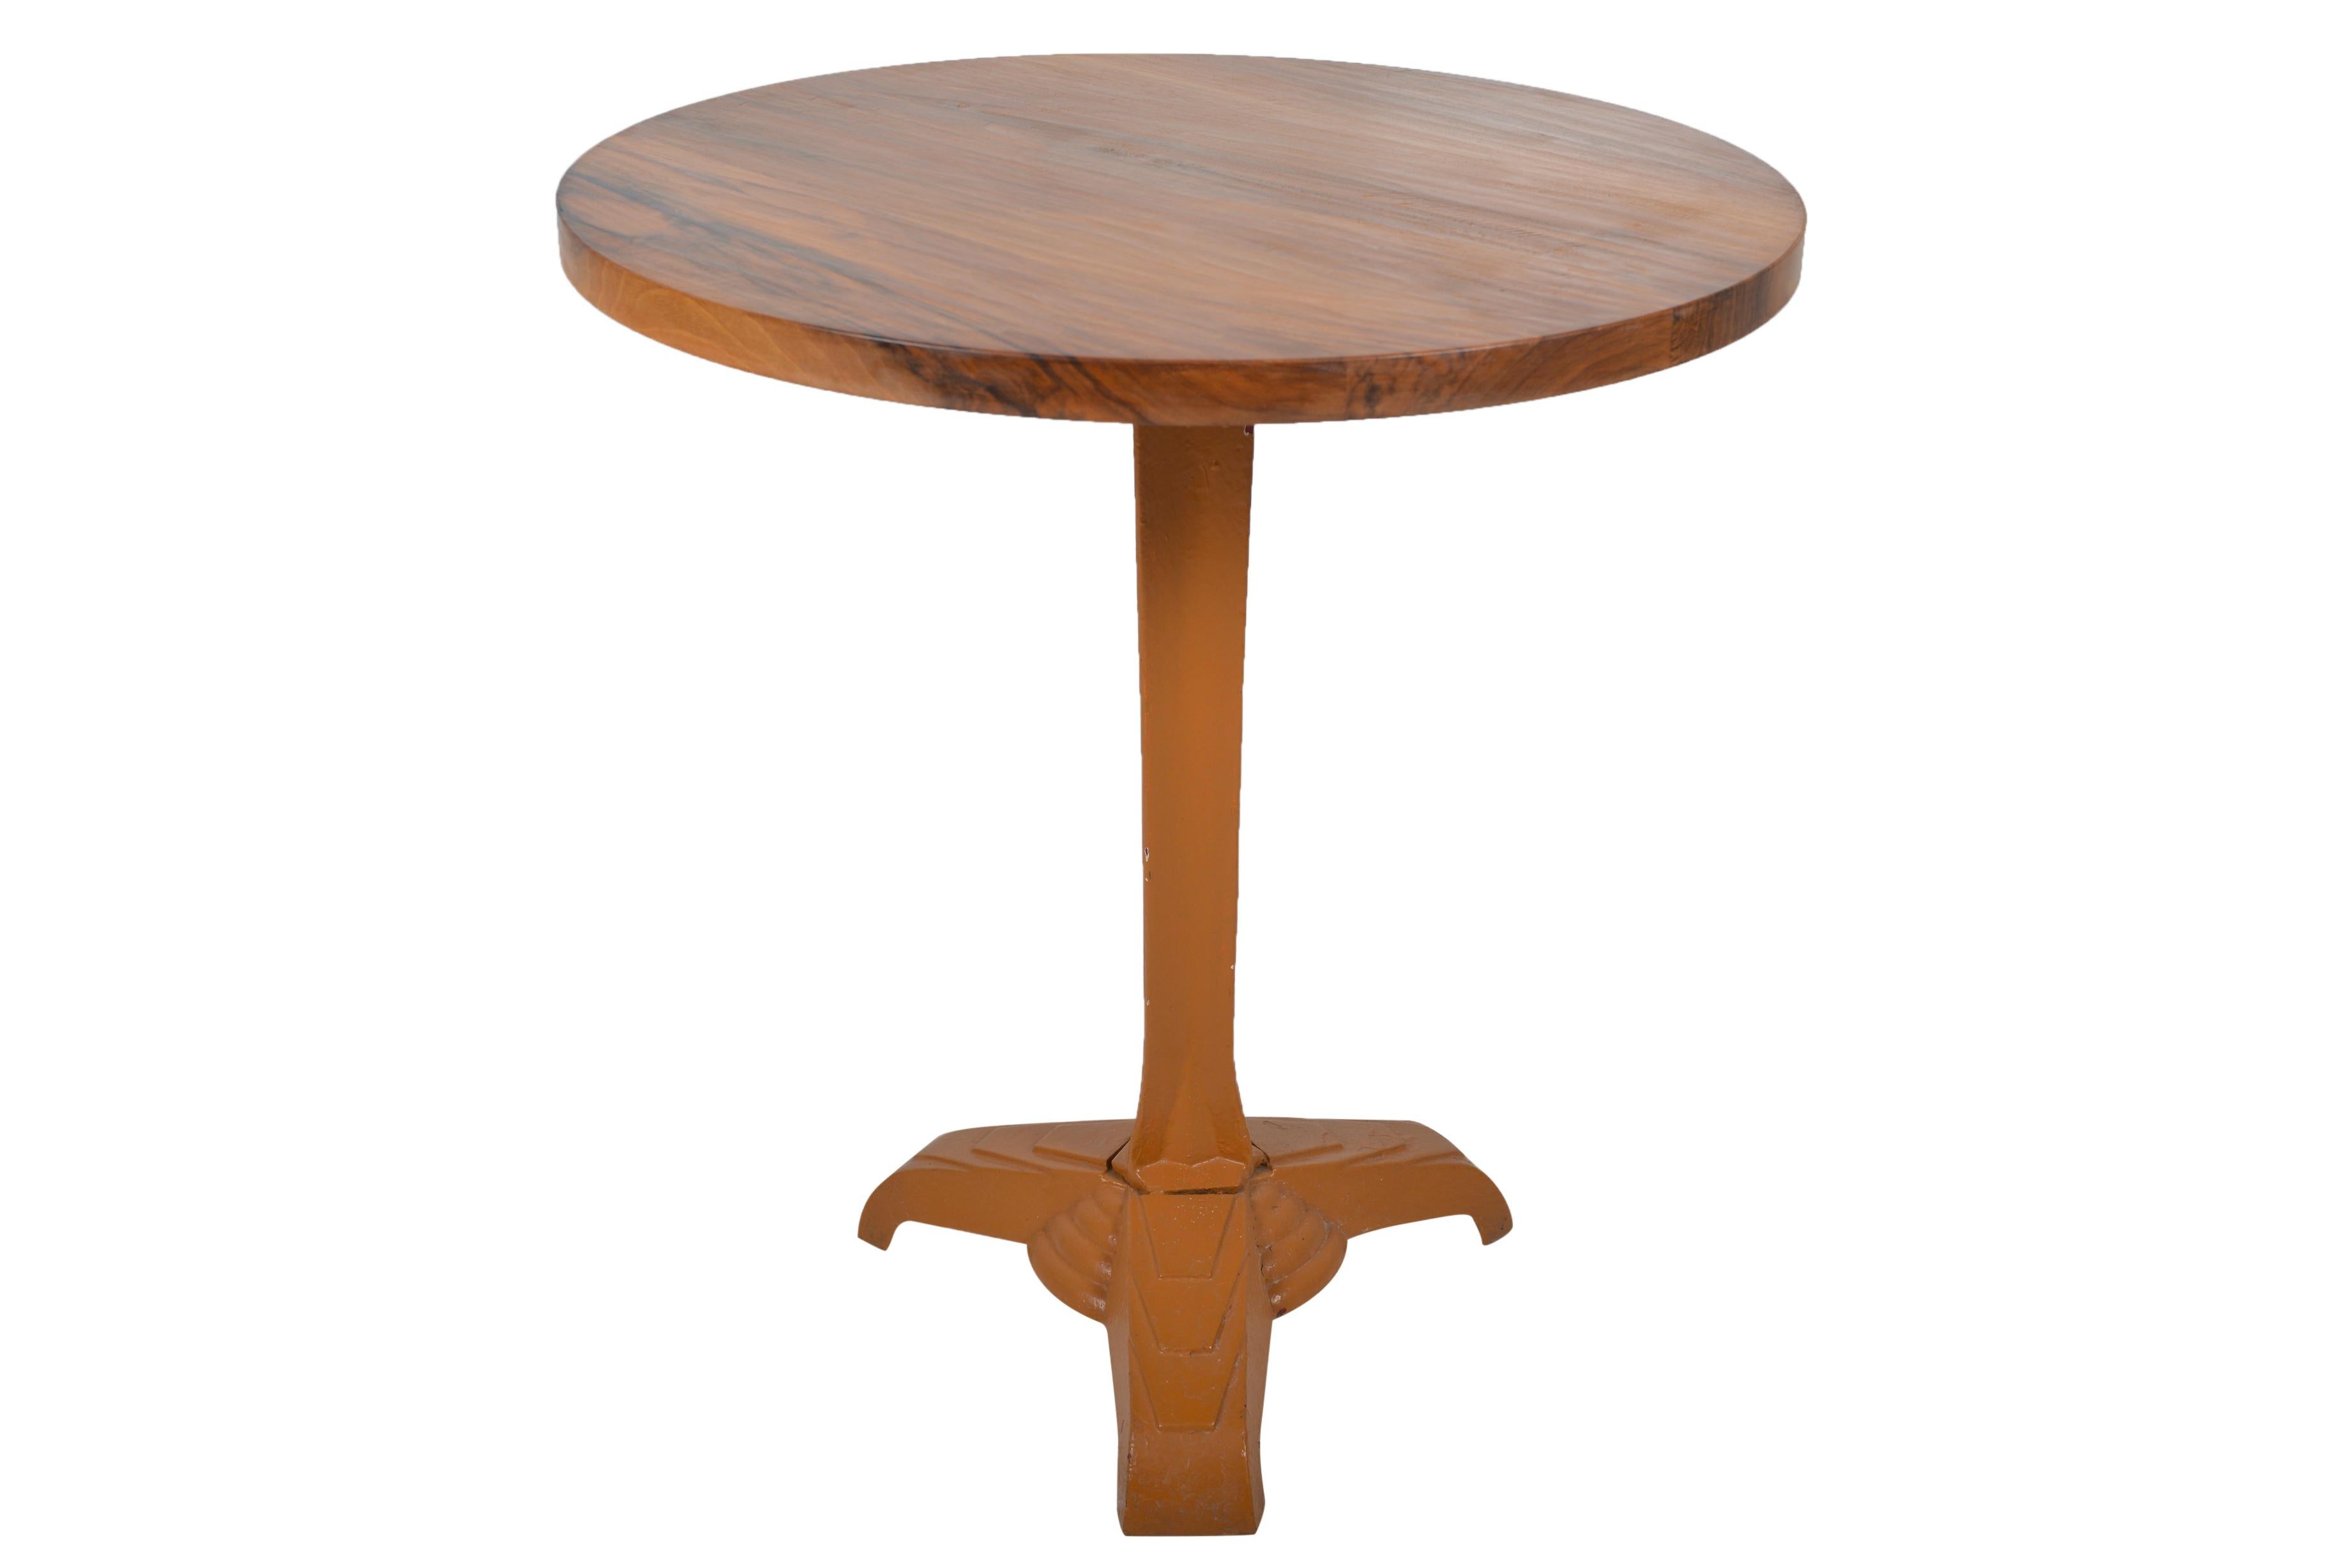 Wonderful ochre painted Art Deco cast iron bistro table base with well figured walnut top. Tripod leg with fan shaped decorations.